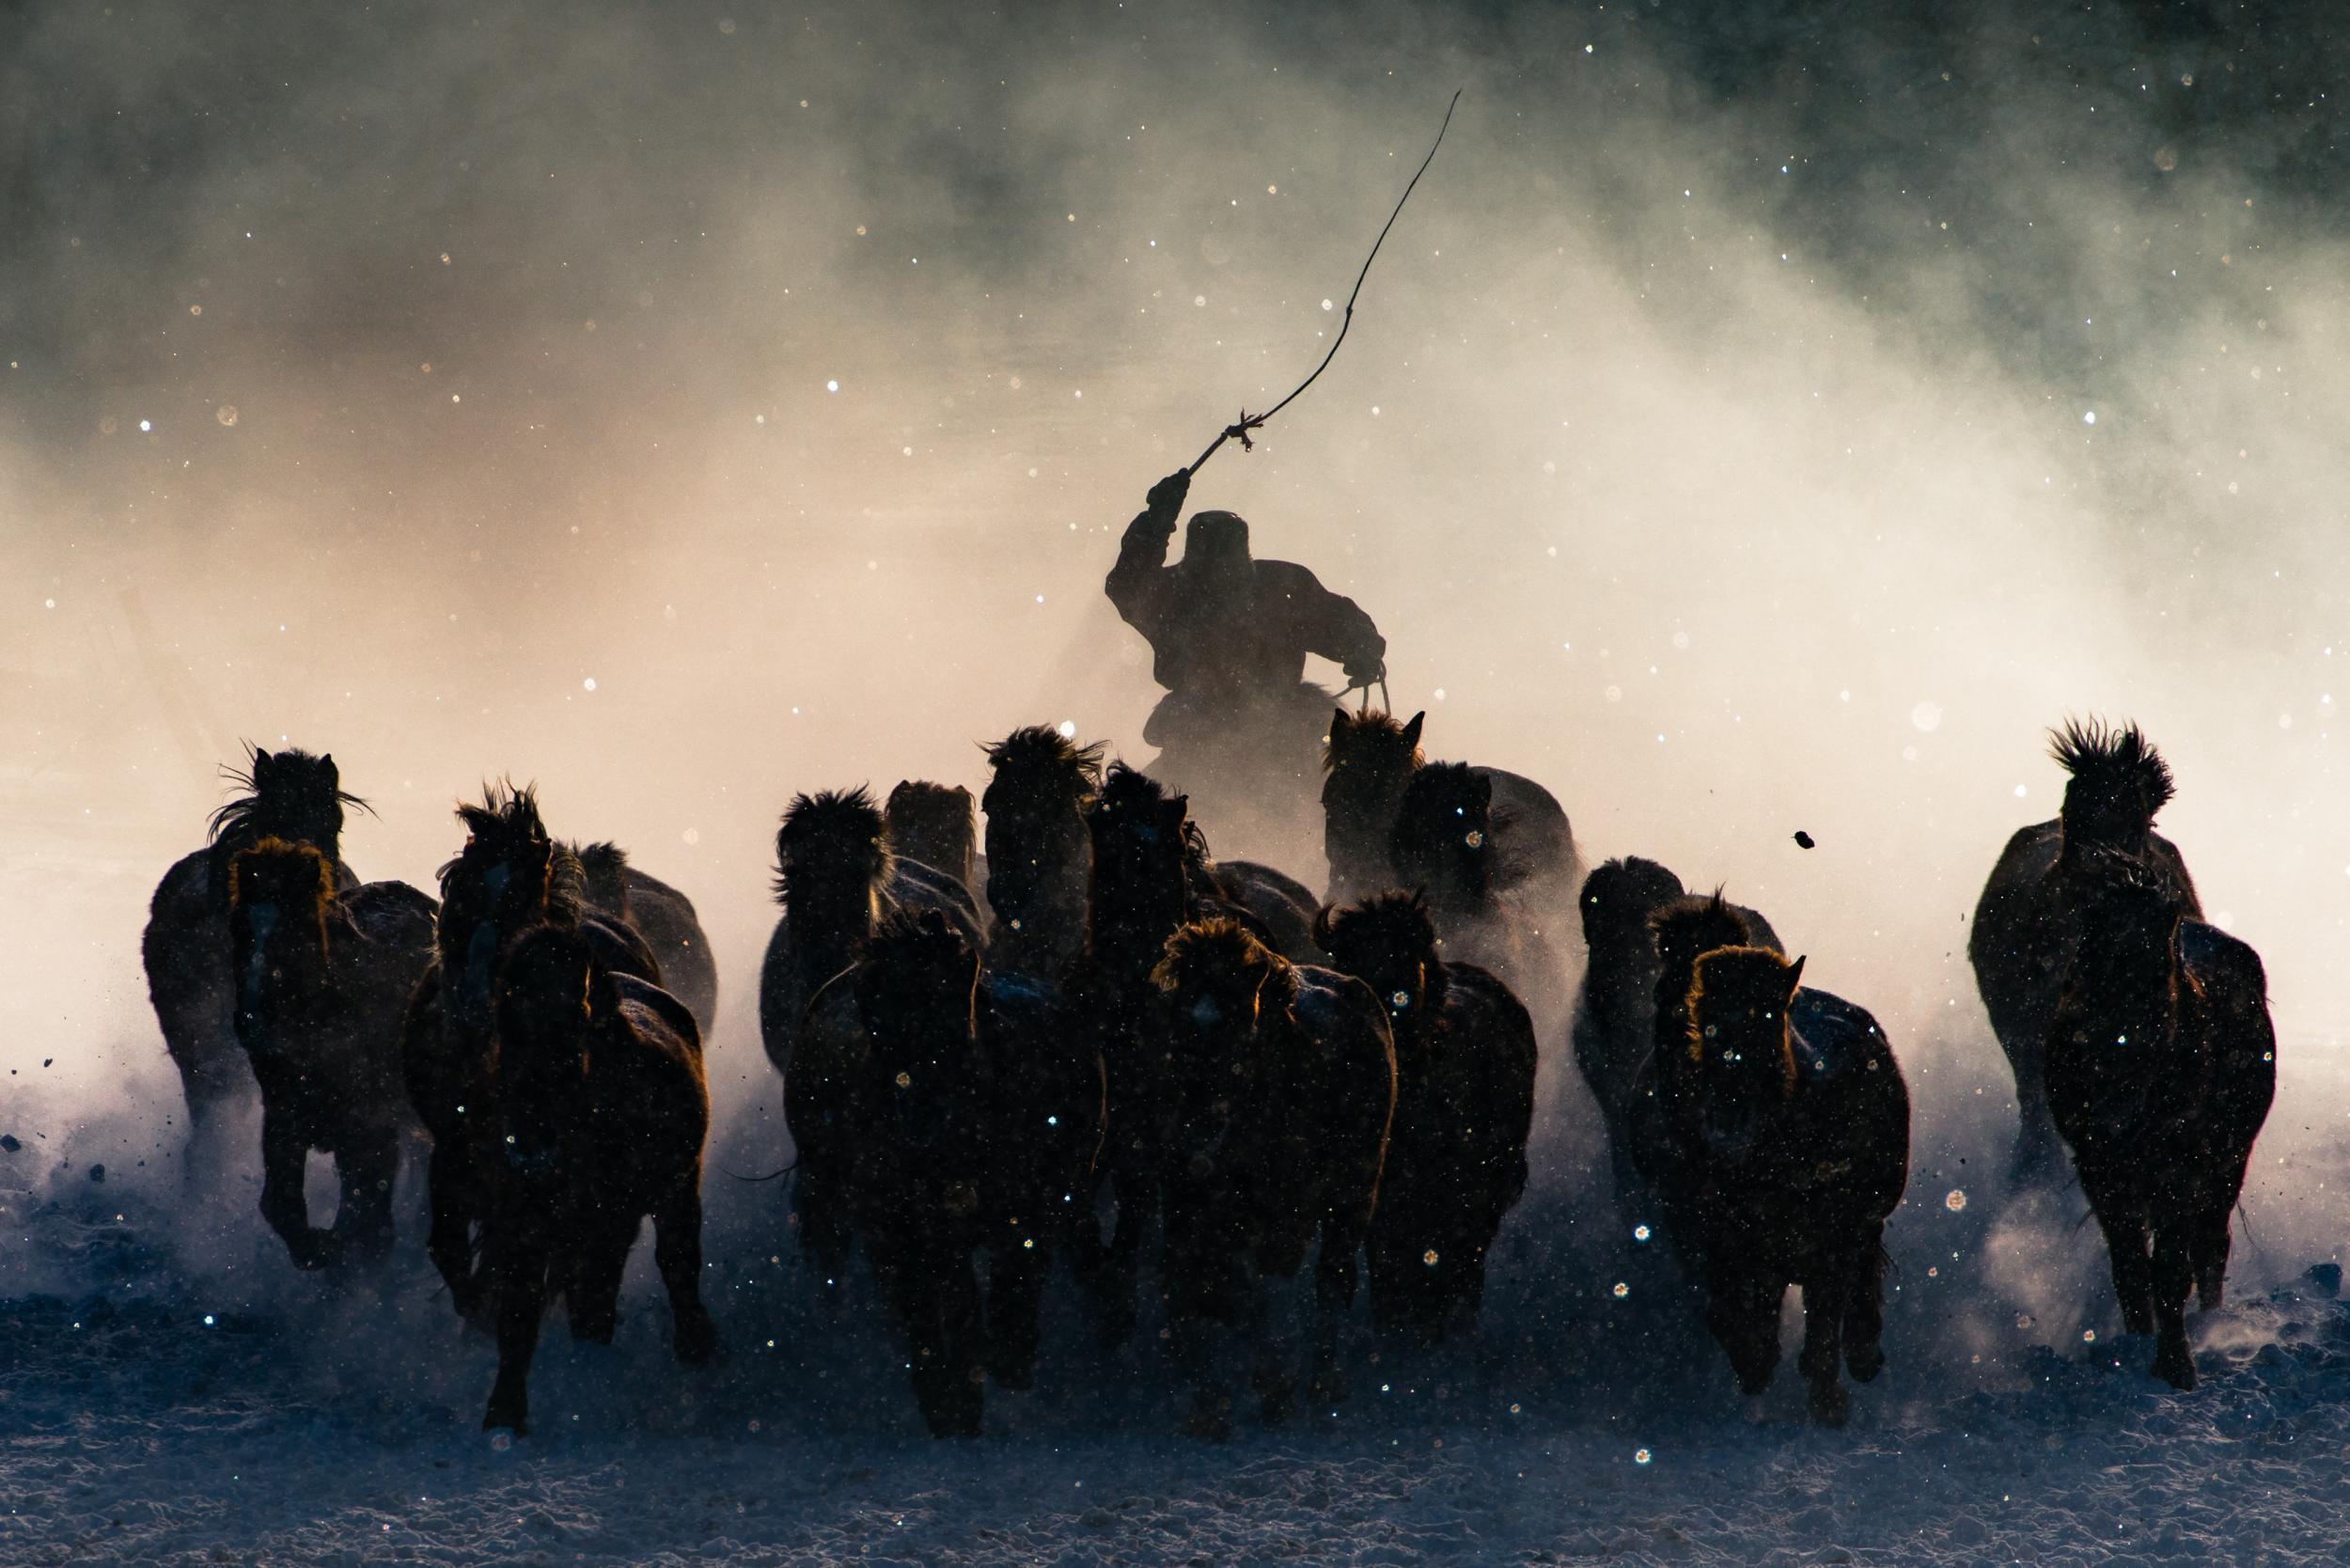 Charging Inner Mongolia horseman sweeps top prize in National Geographic Travel Photographer of the Year 2016 The Independent The Independent image